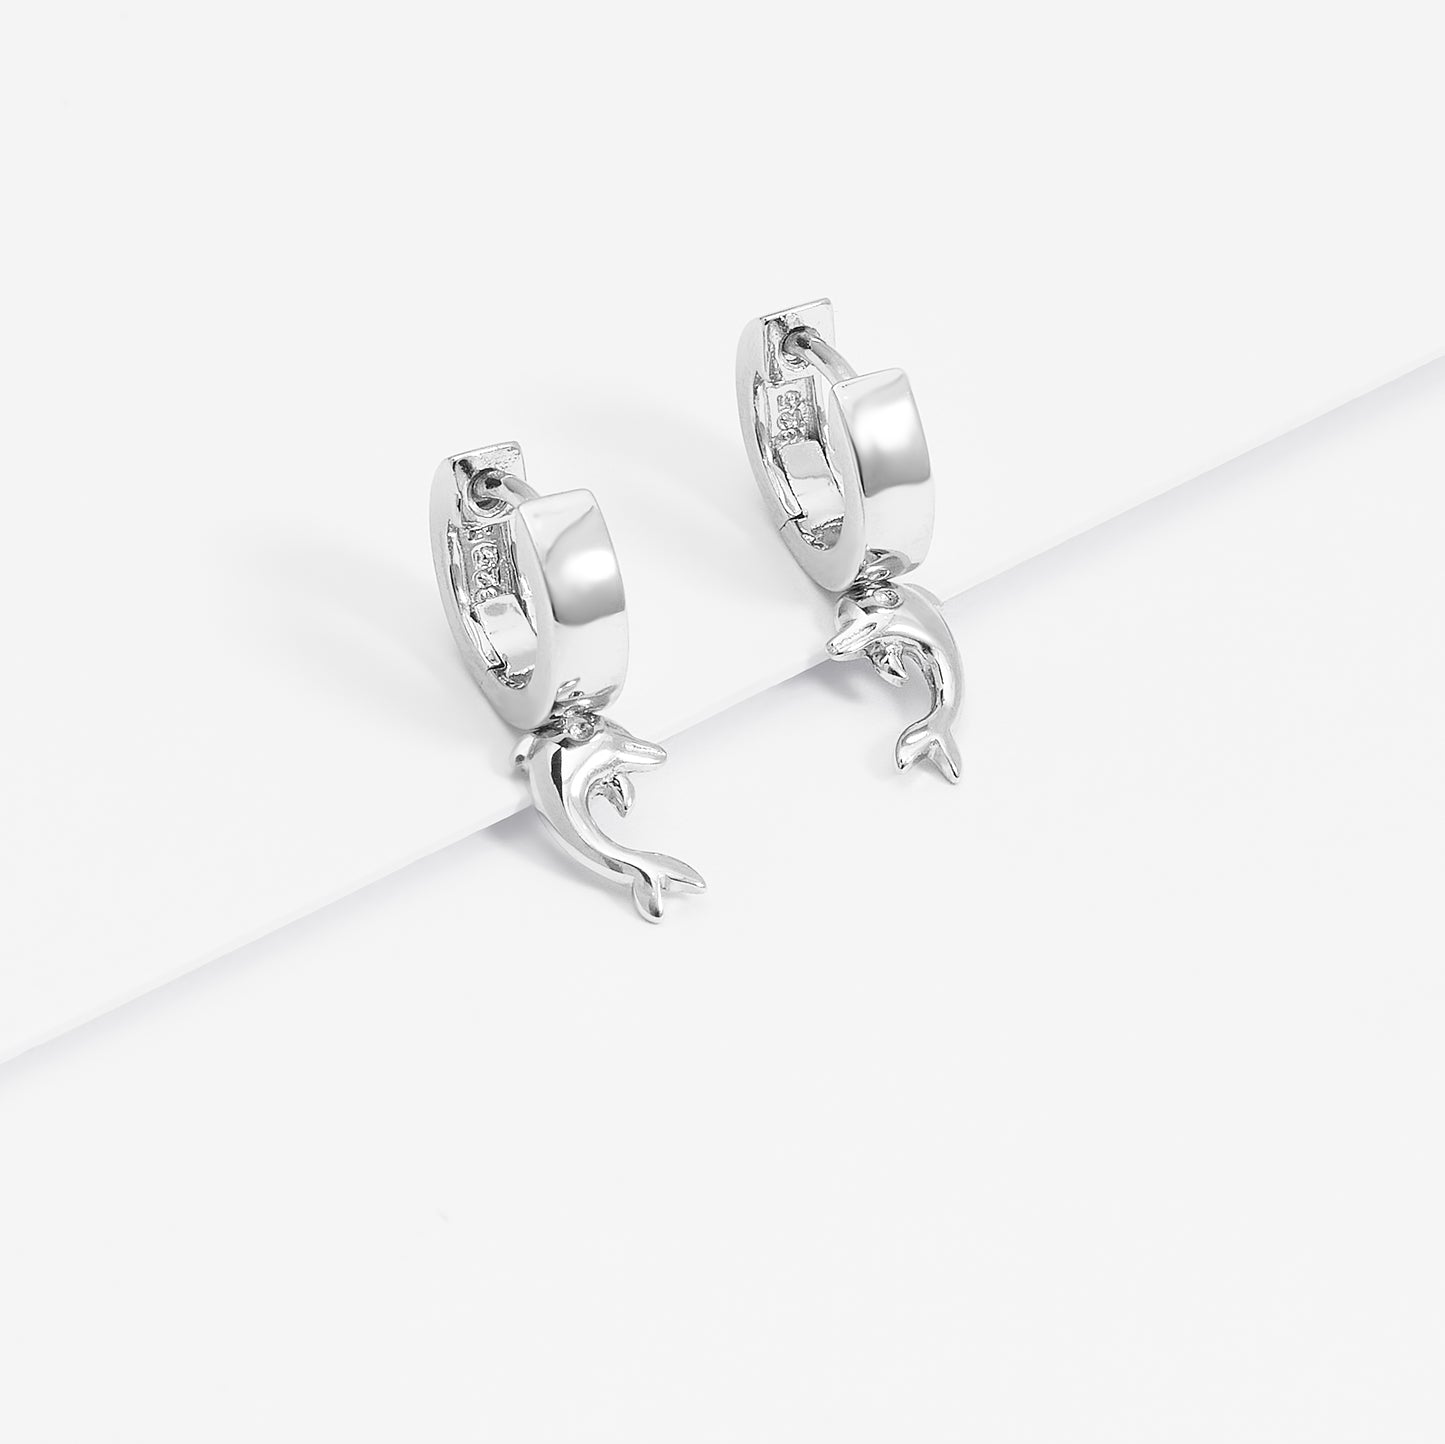 Sterling Silver Huggie Earrings With Dangling Dolphin